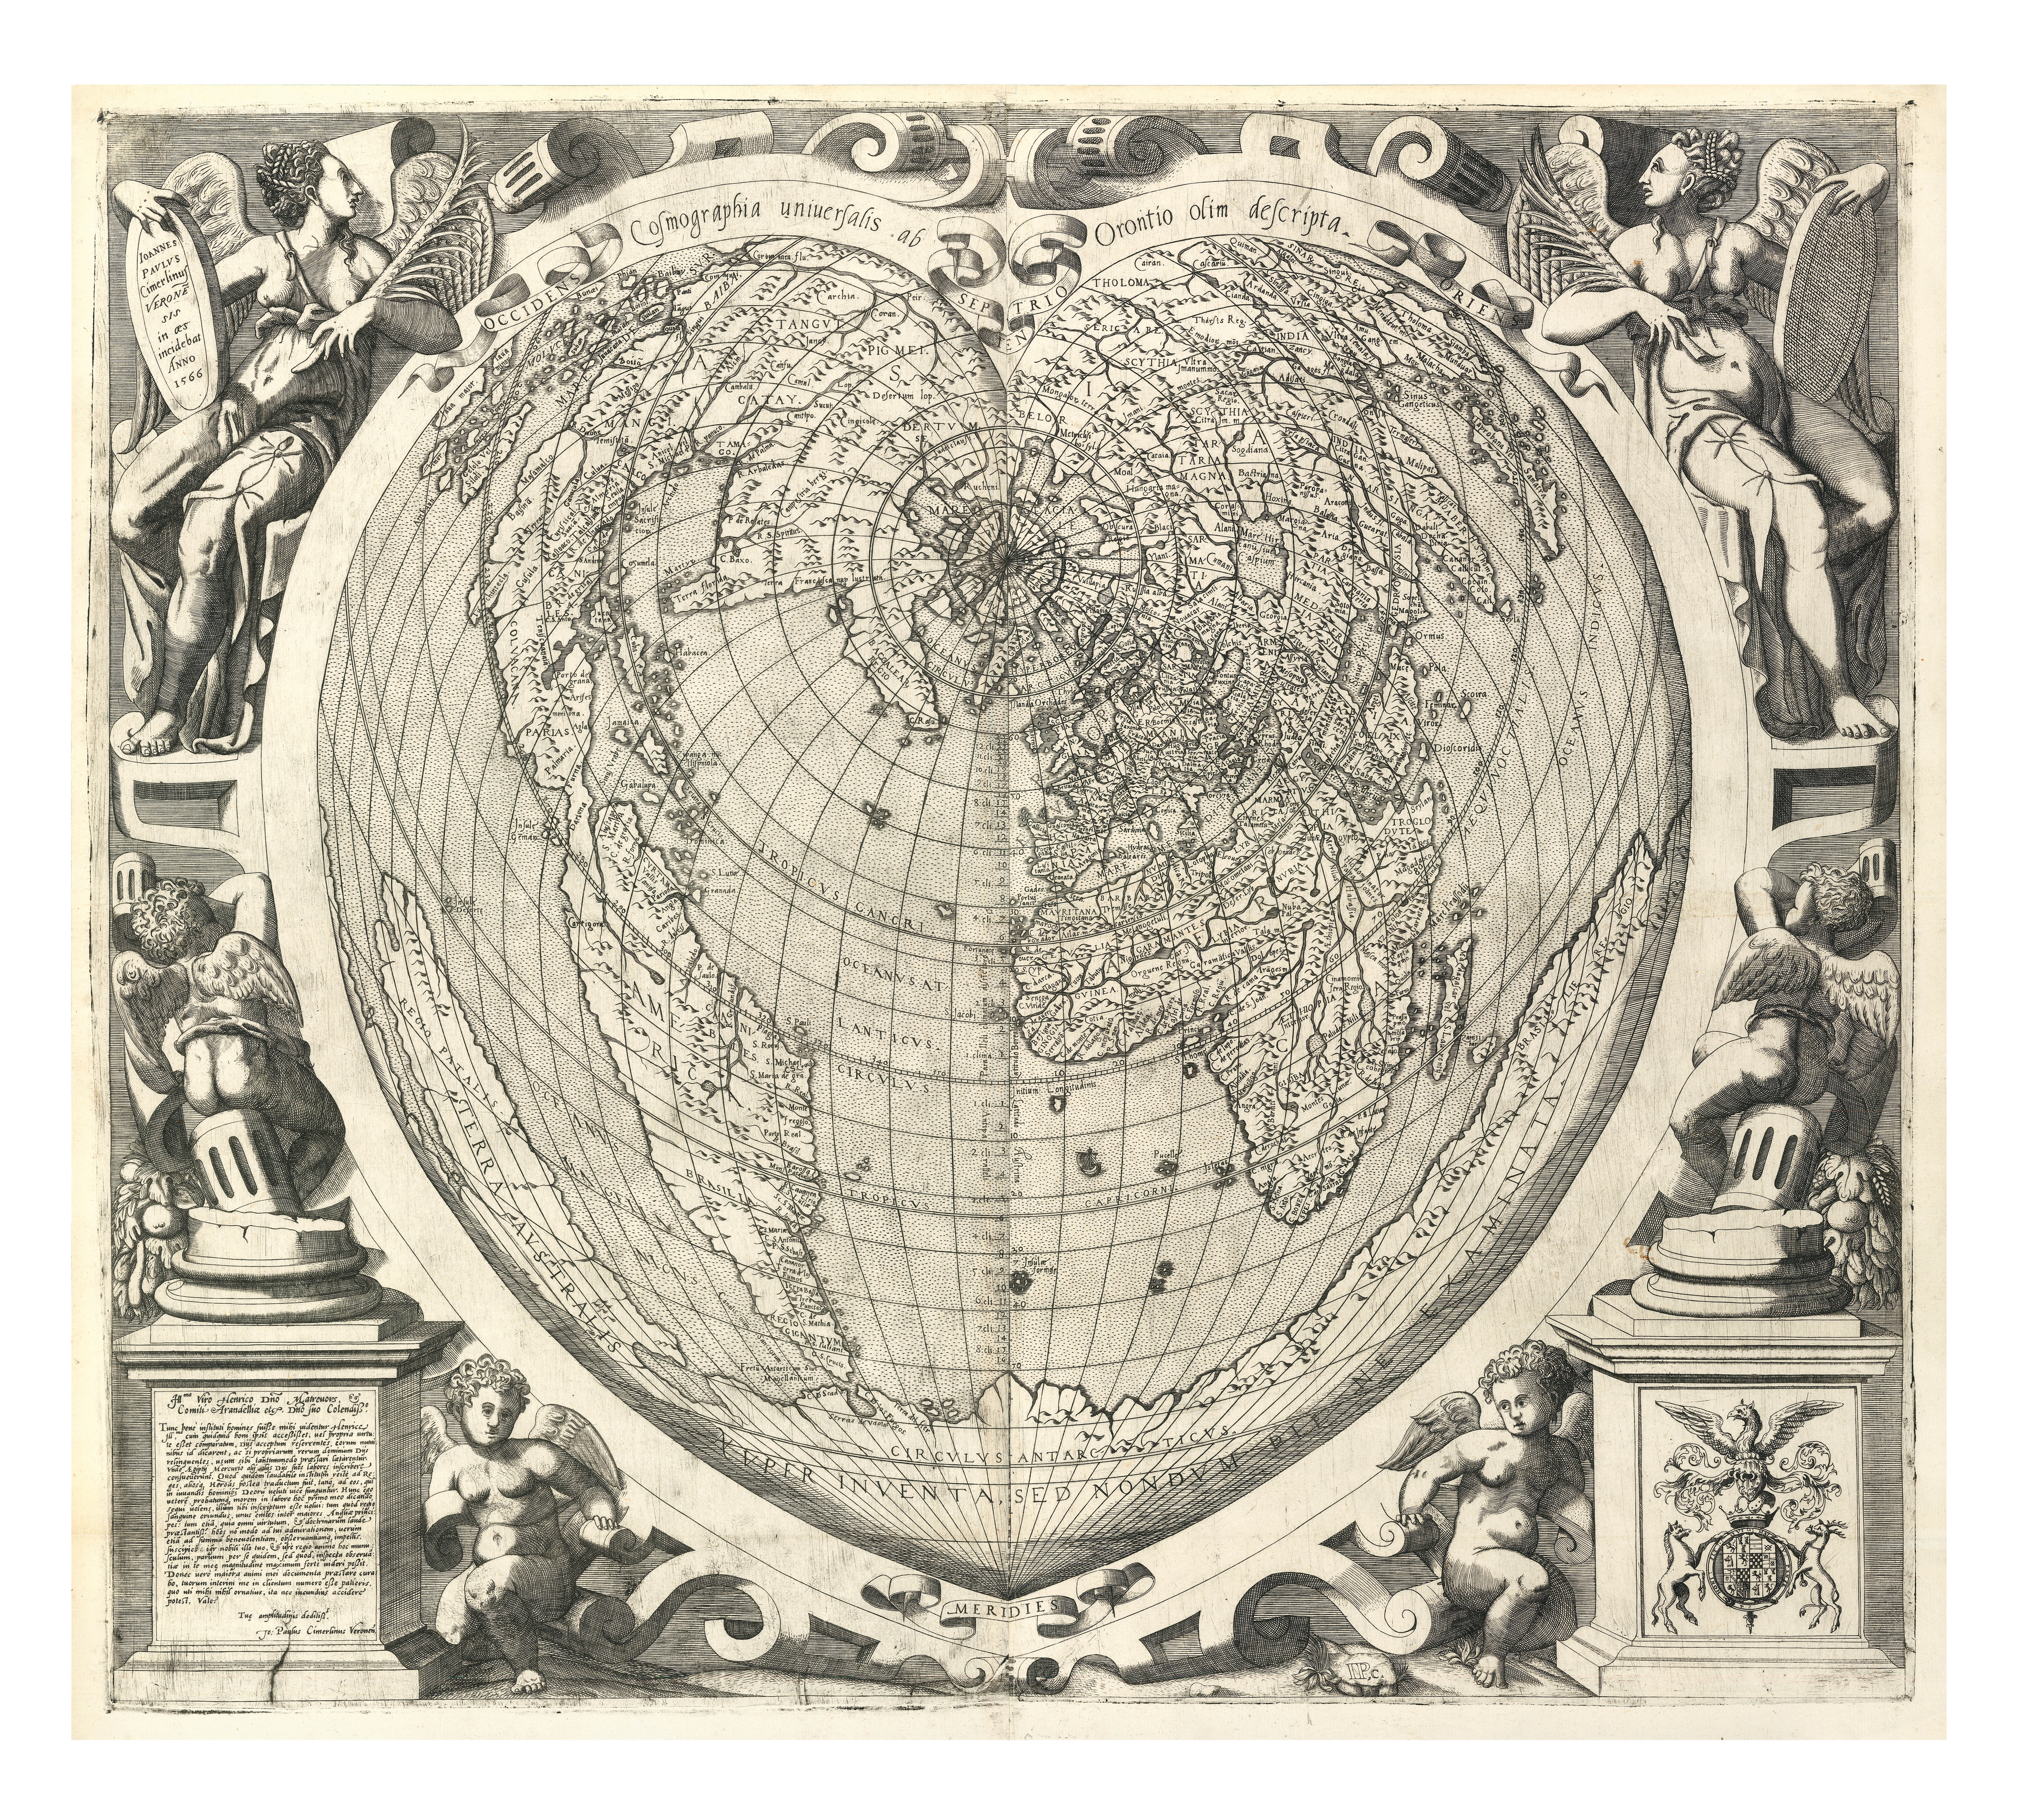 A black and white intaglio engraving of the world on a truly heart-shaped projection and in black and white. Surrounding the earth are cherubs, angels, and architectural elements such as pedestals.